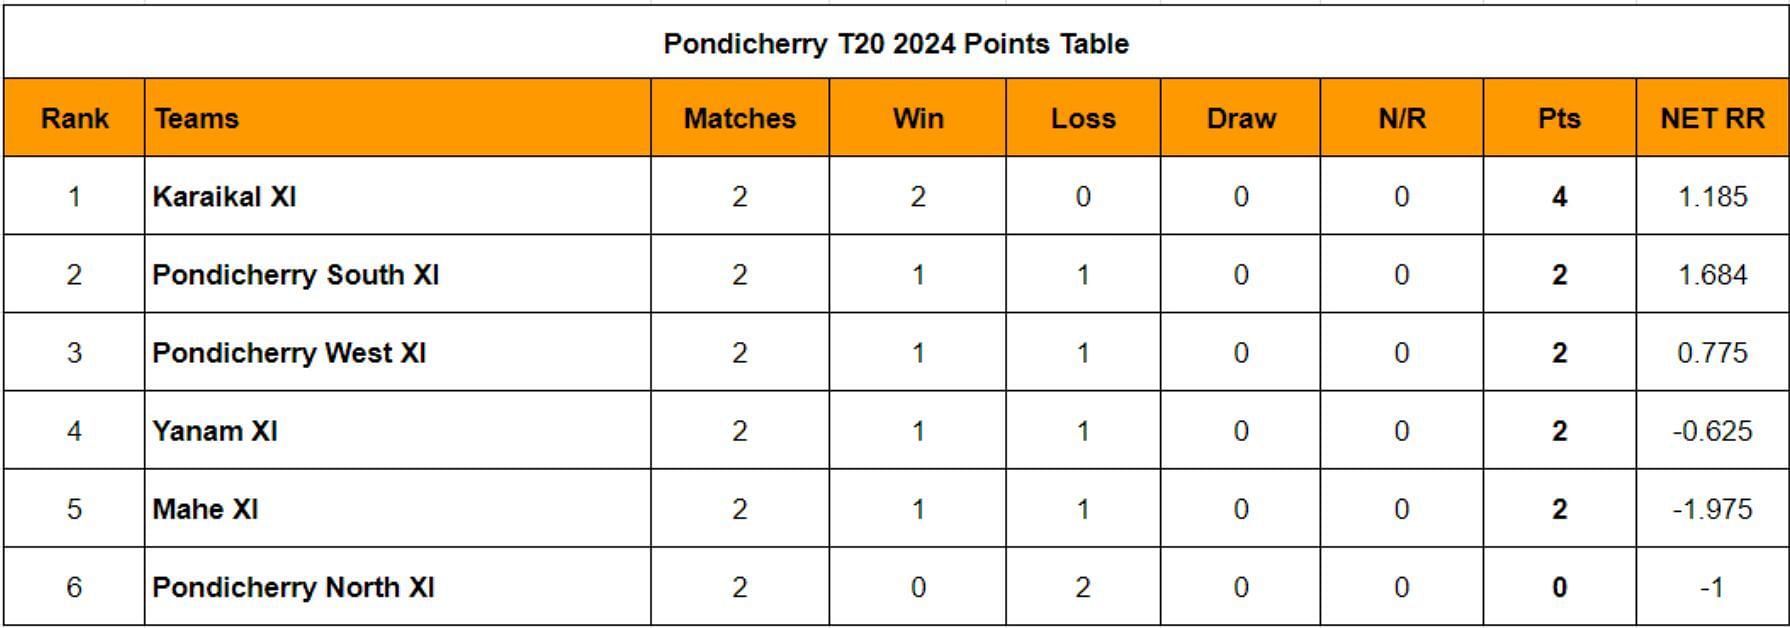 Pondicherry T20 2024 Points Table Updated standings after Match 6